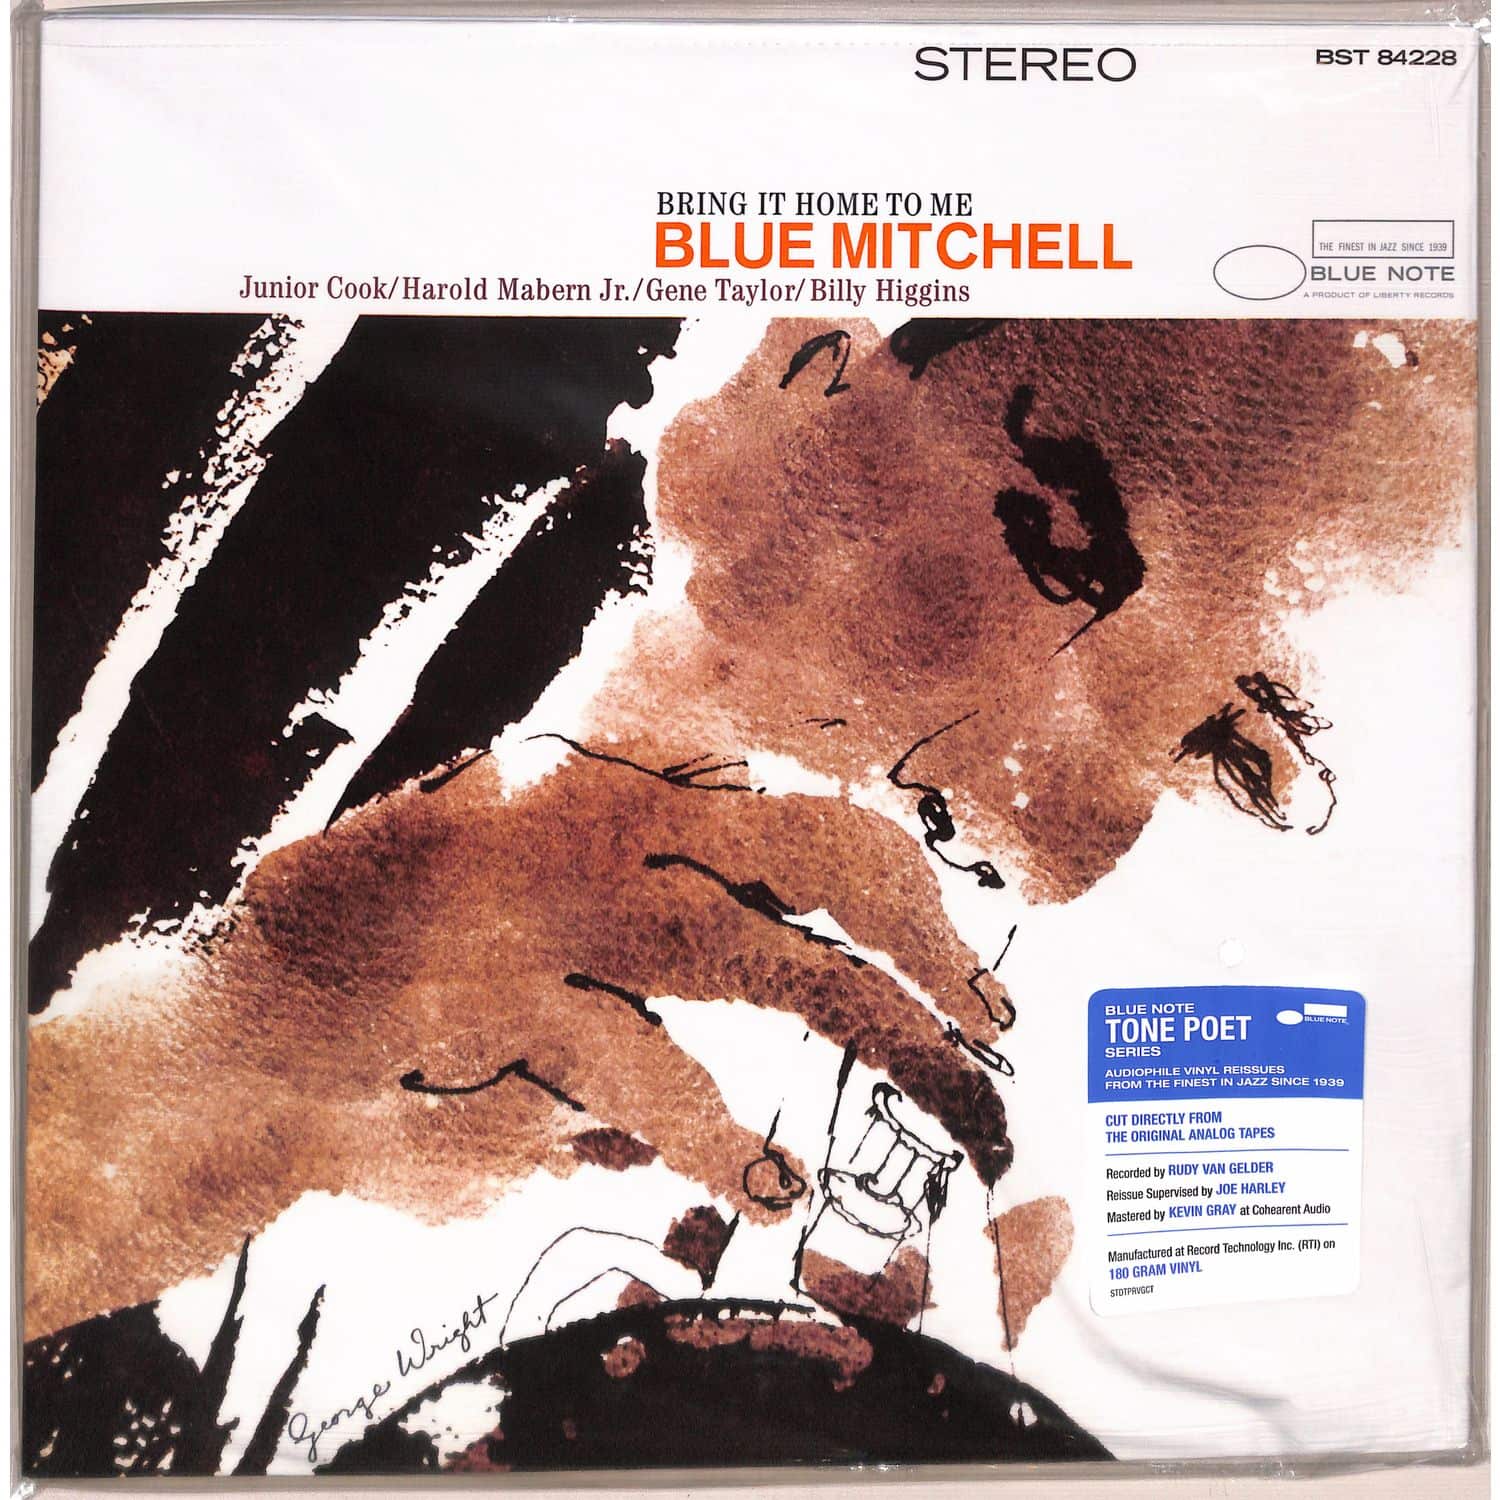 Blue Mitchell - BRING IT HOME TO ME 